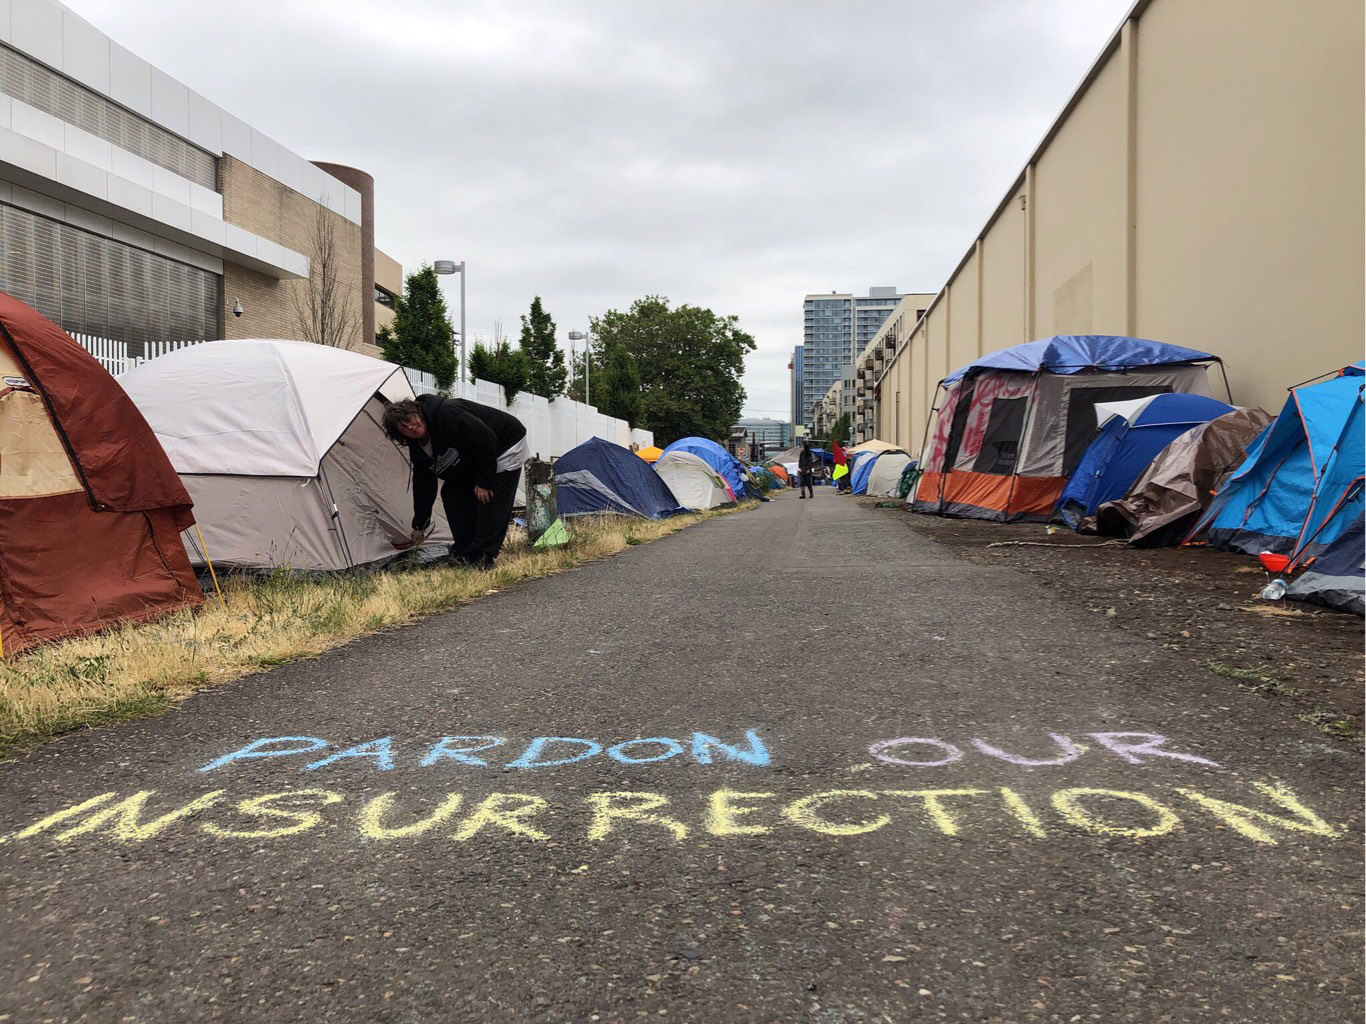 Occupy ICE Portland: Another Perspective